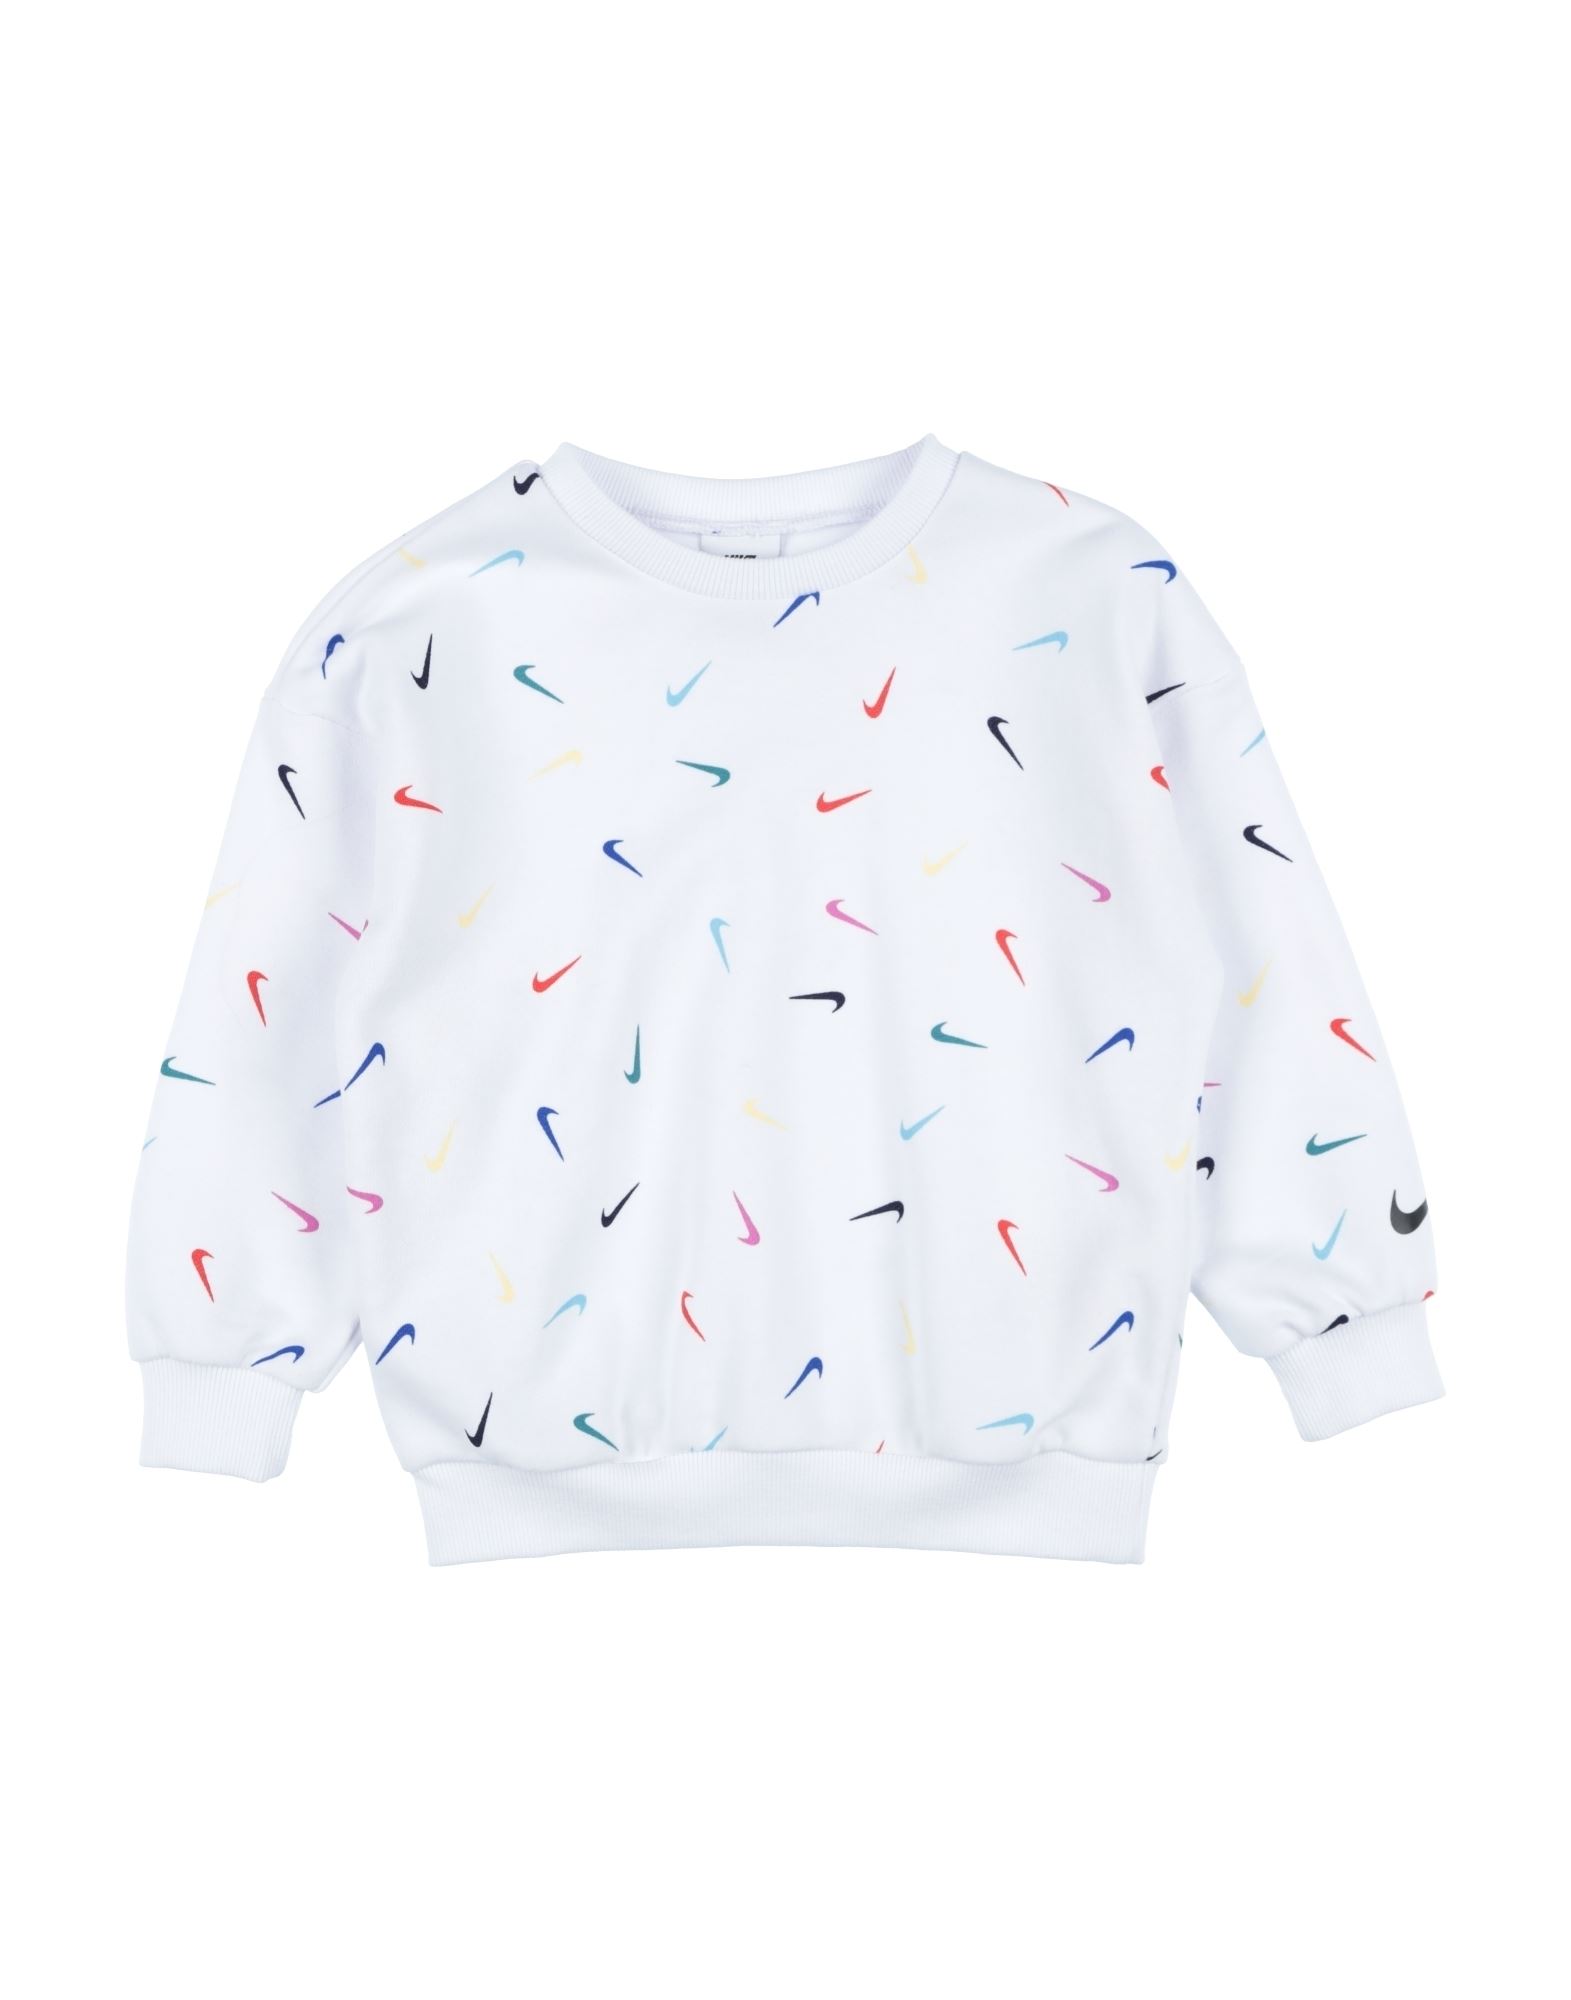 ԥ볫NIKE 륺 3-8  åȥ ۥ磻 6 åȥ 80% / ݥꥨƥ 20% SNACK PACK BF CREW